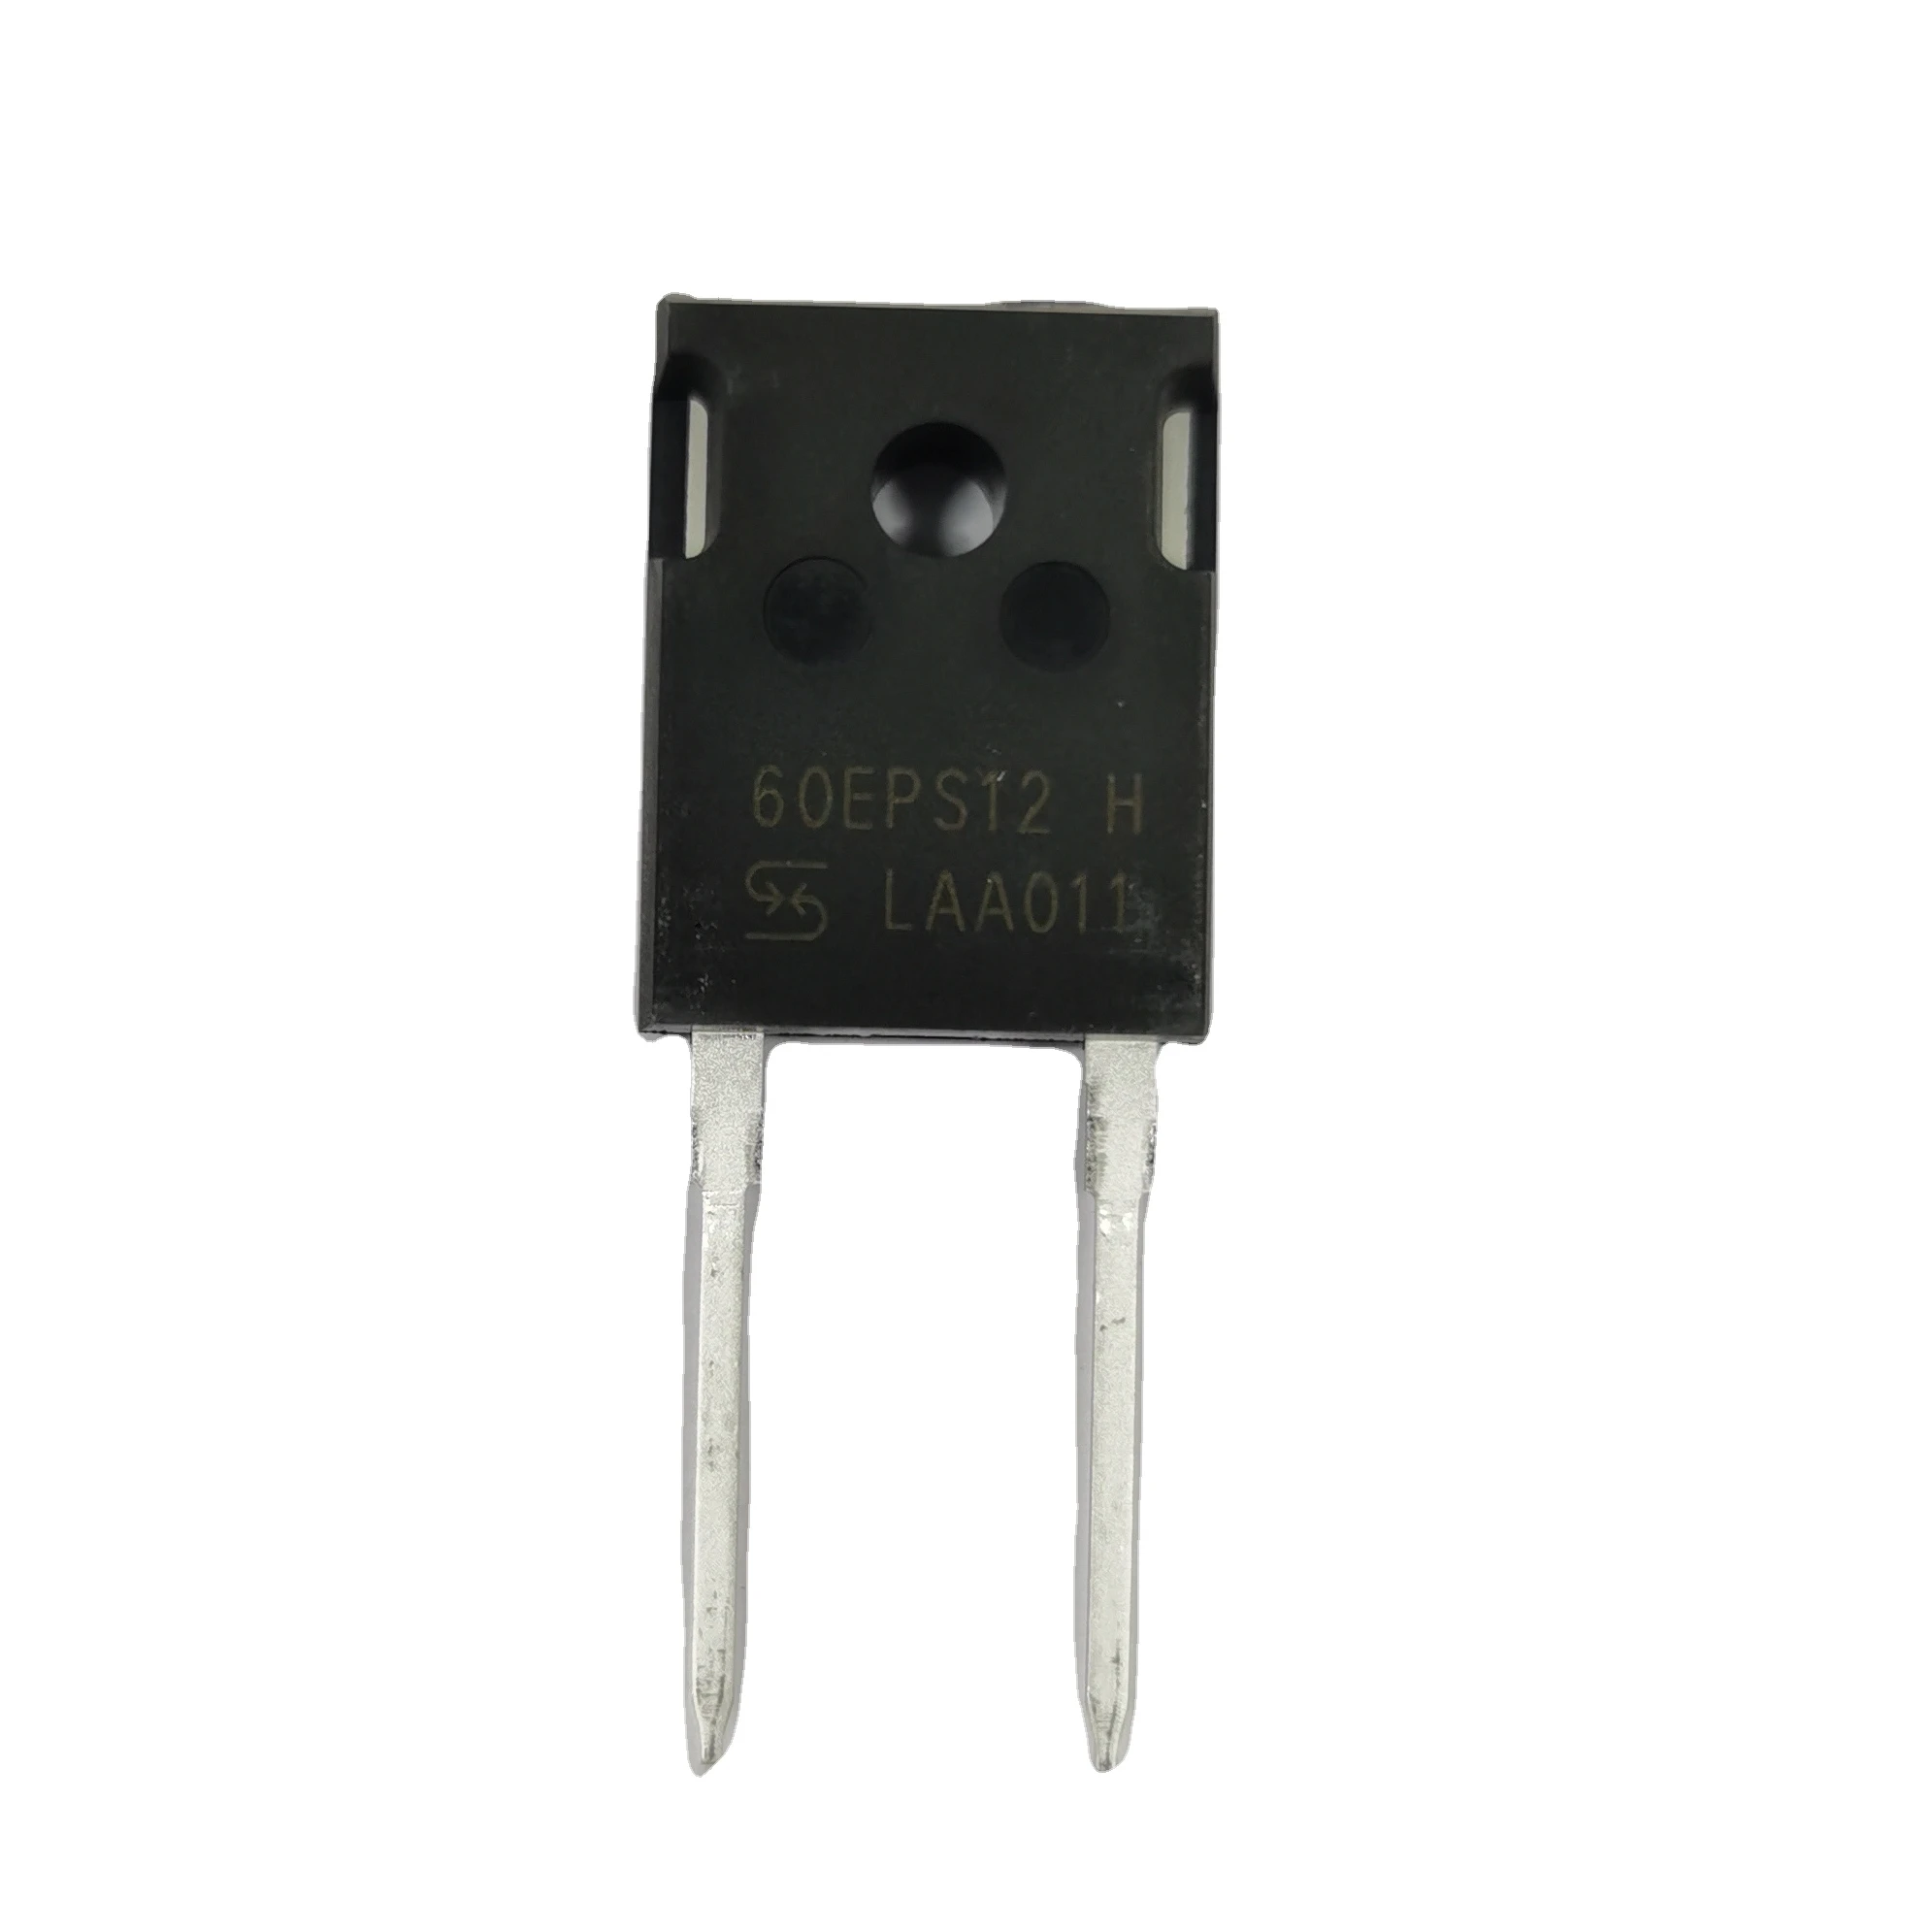 60A1200V  To-247 Factory Direct supplying Best Quality lowest price  Rectifier  diode  60EPS12 DH